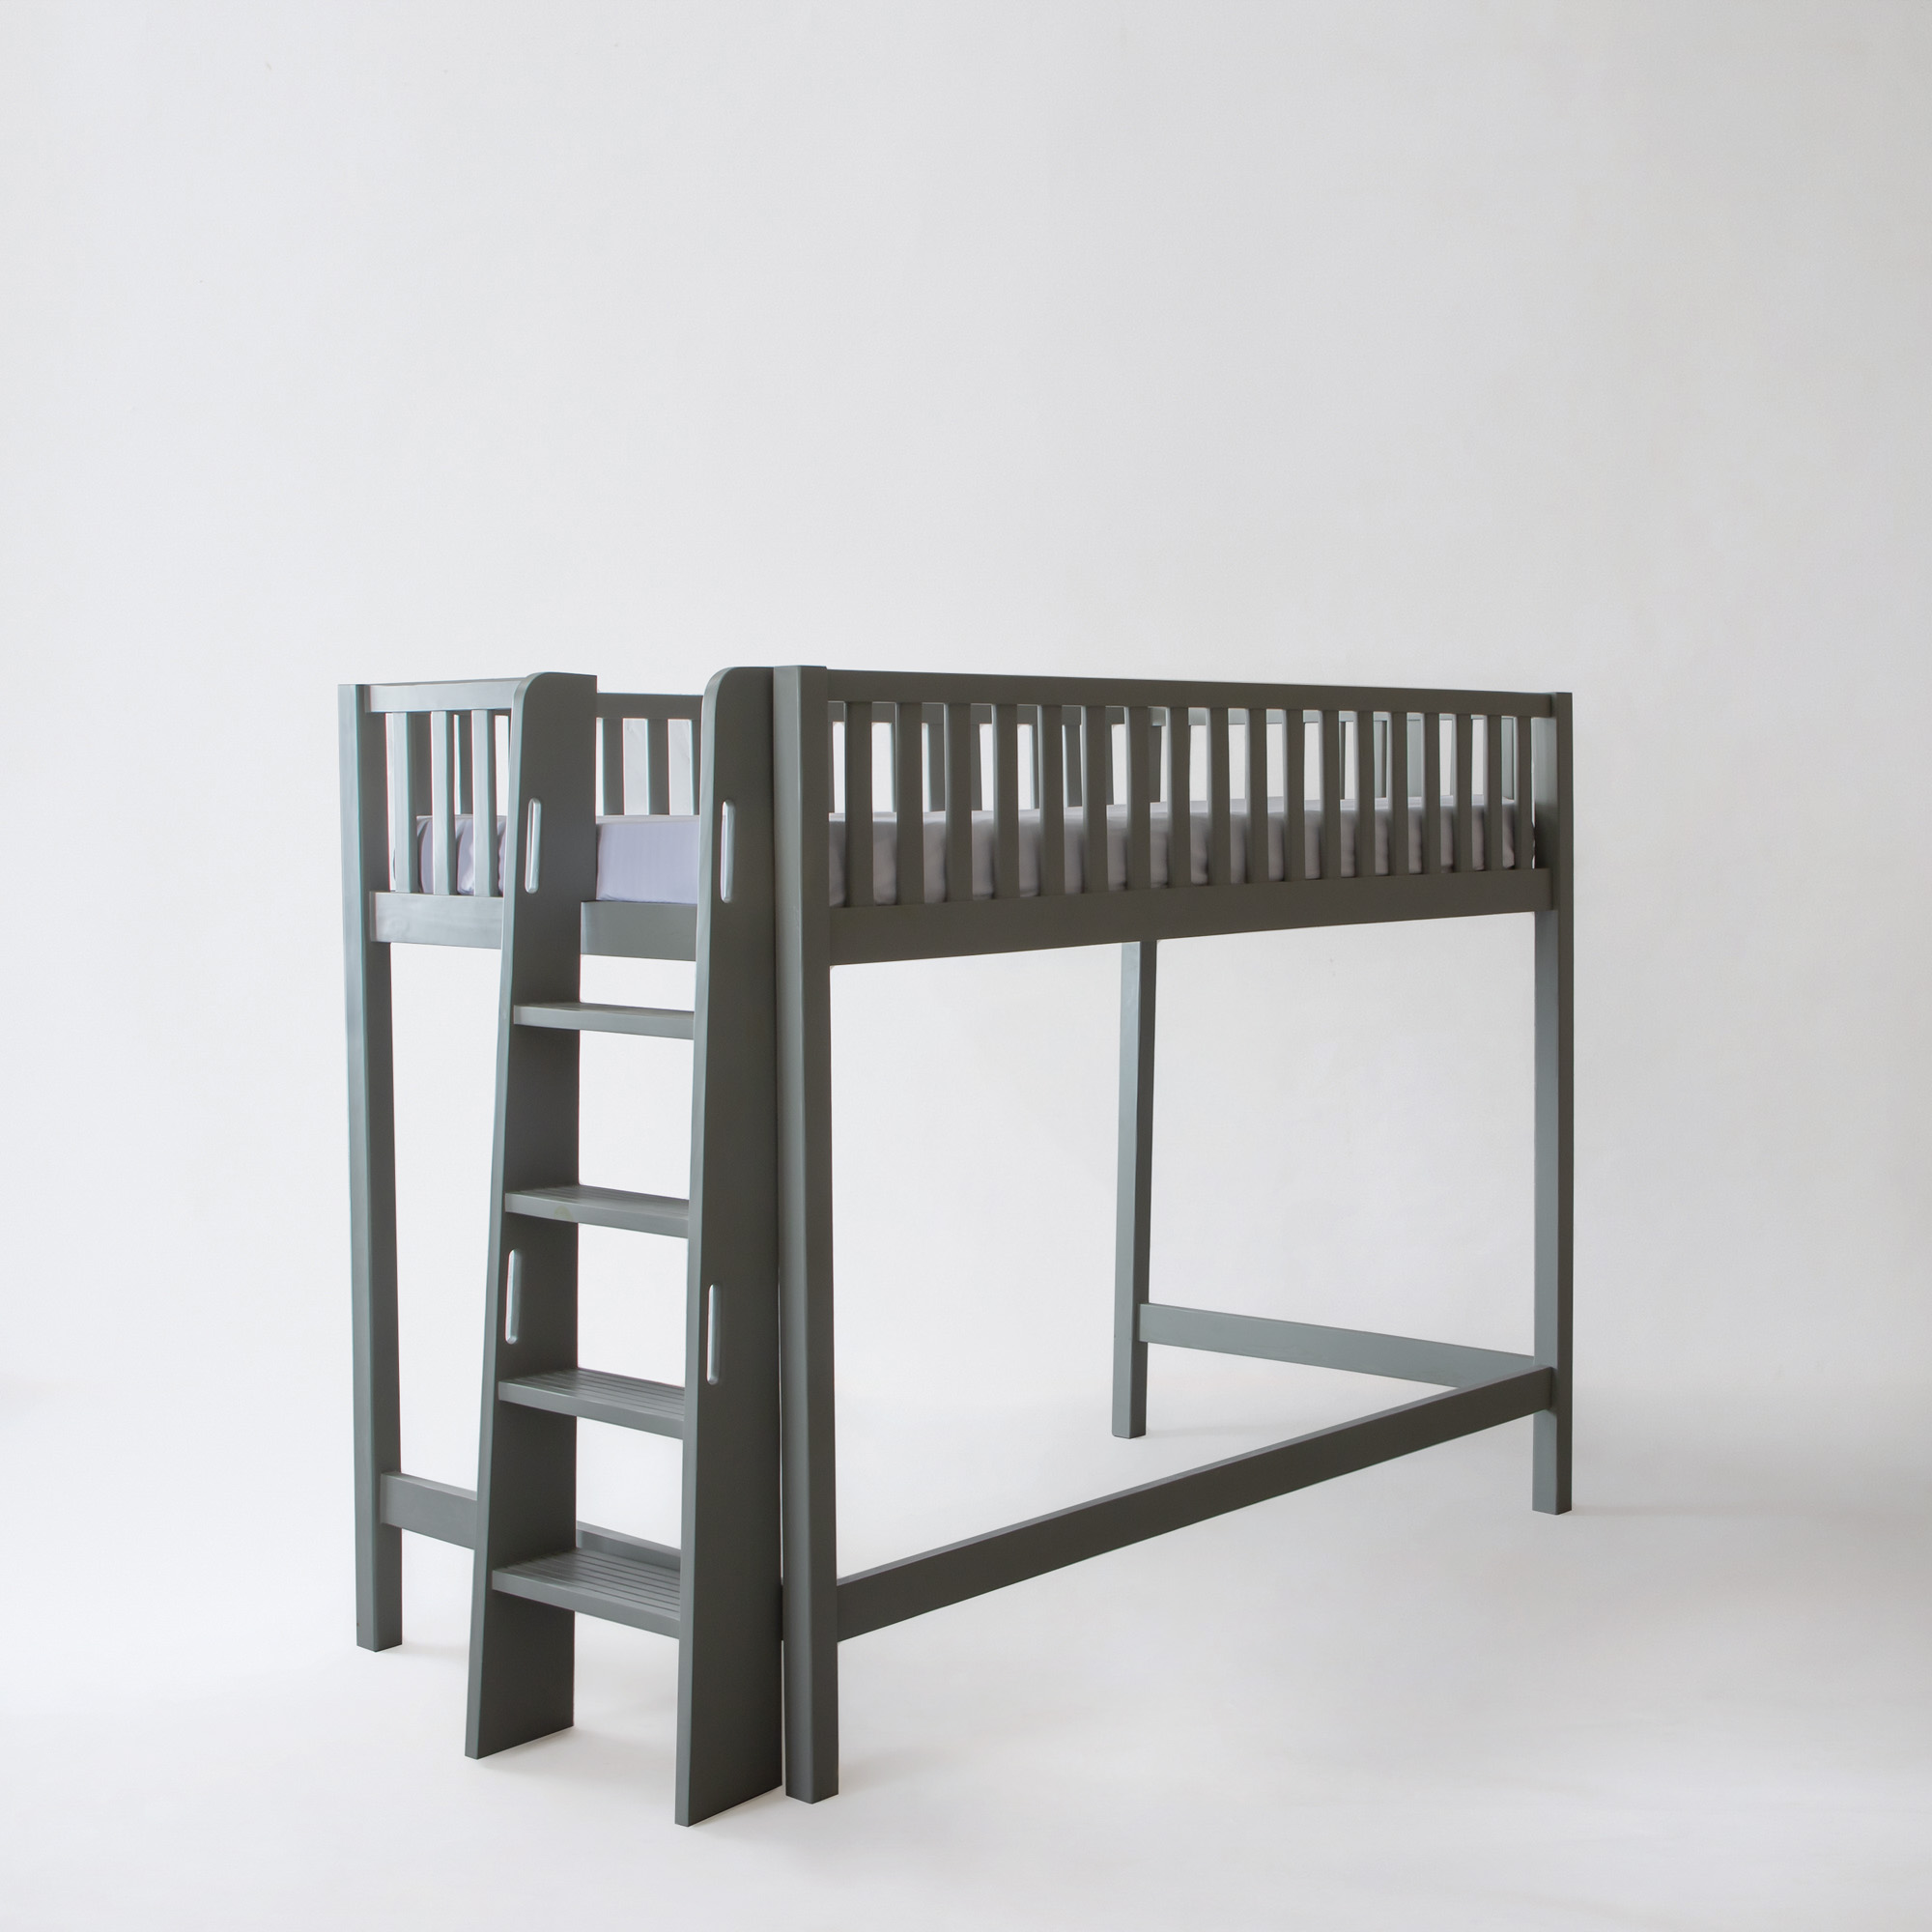 Island Bunk Bed with Wooden Ladder